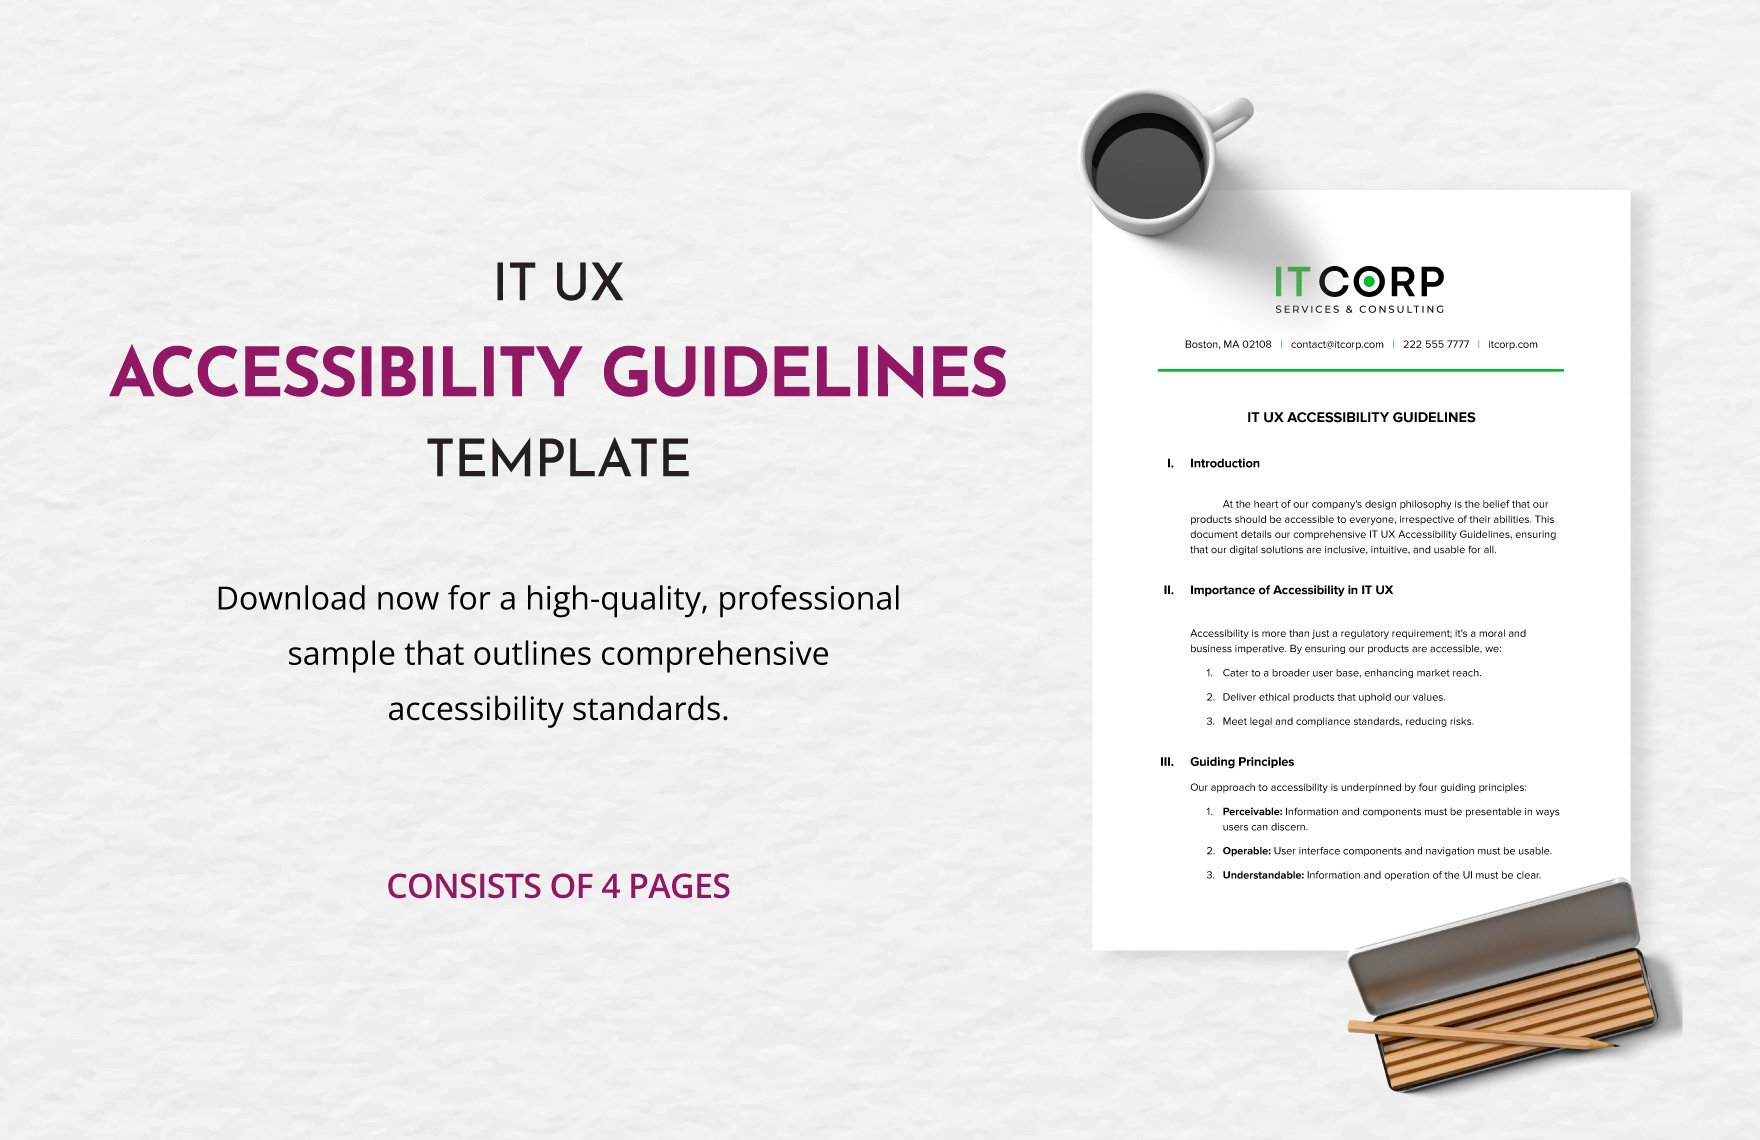 IT UX Accessibility Guidelines Template